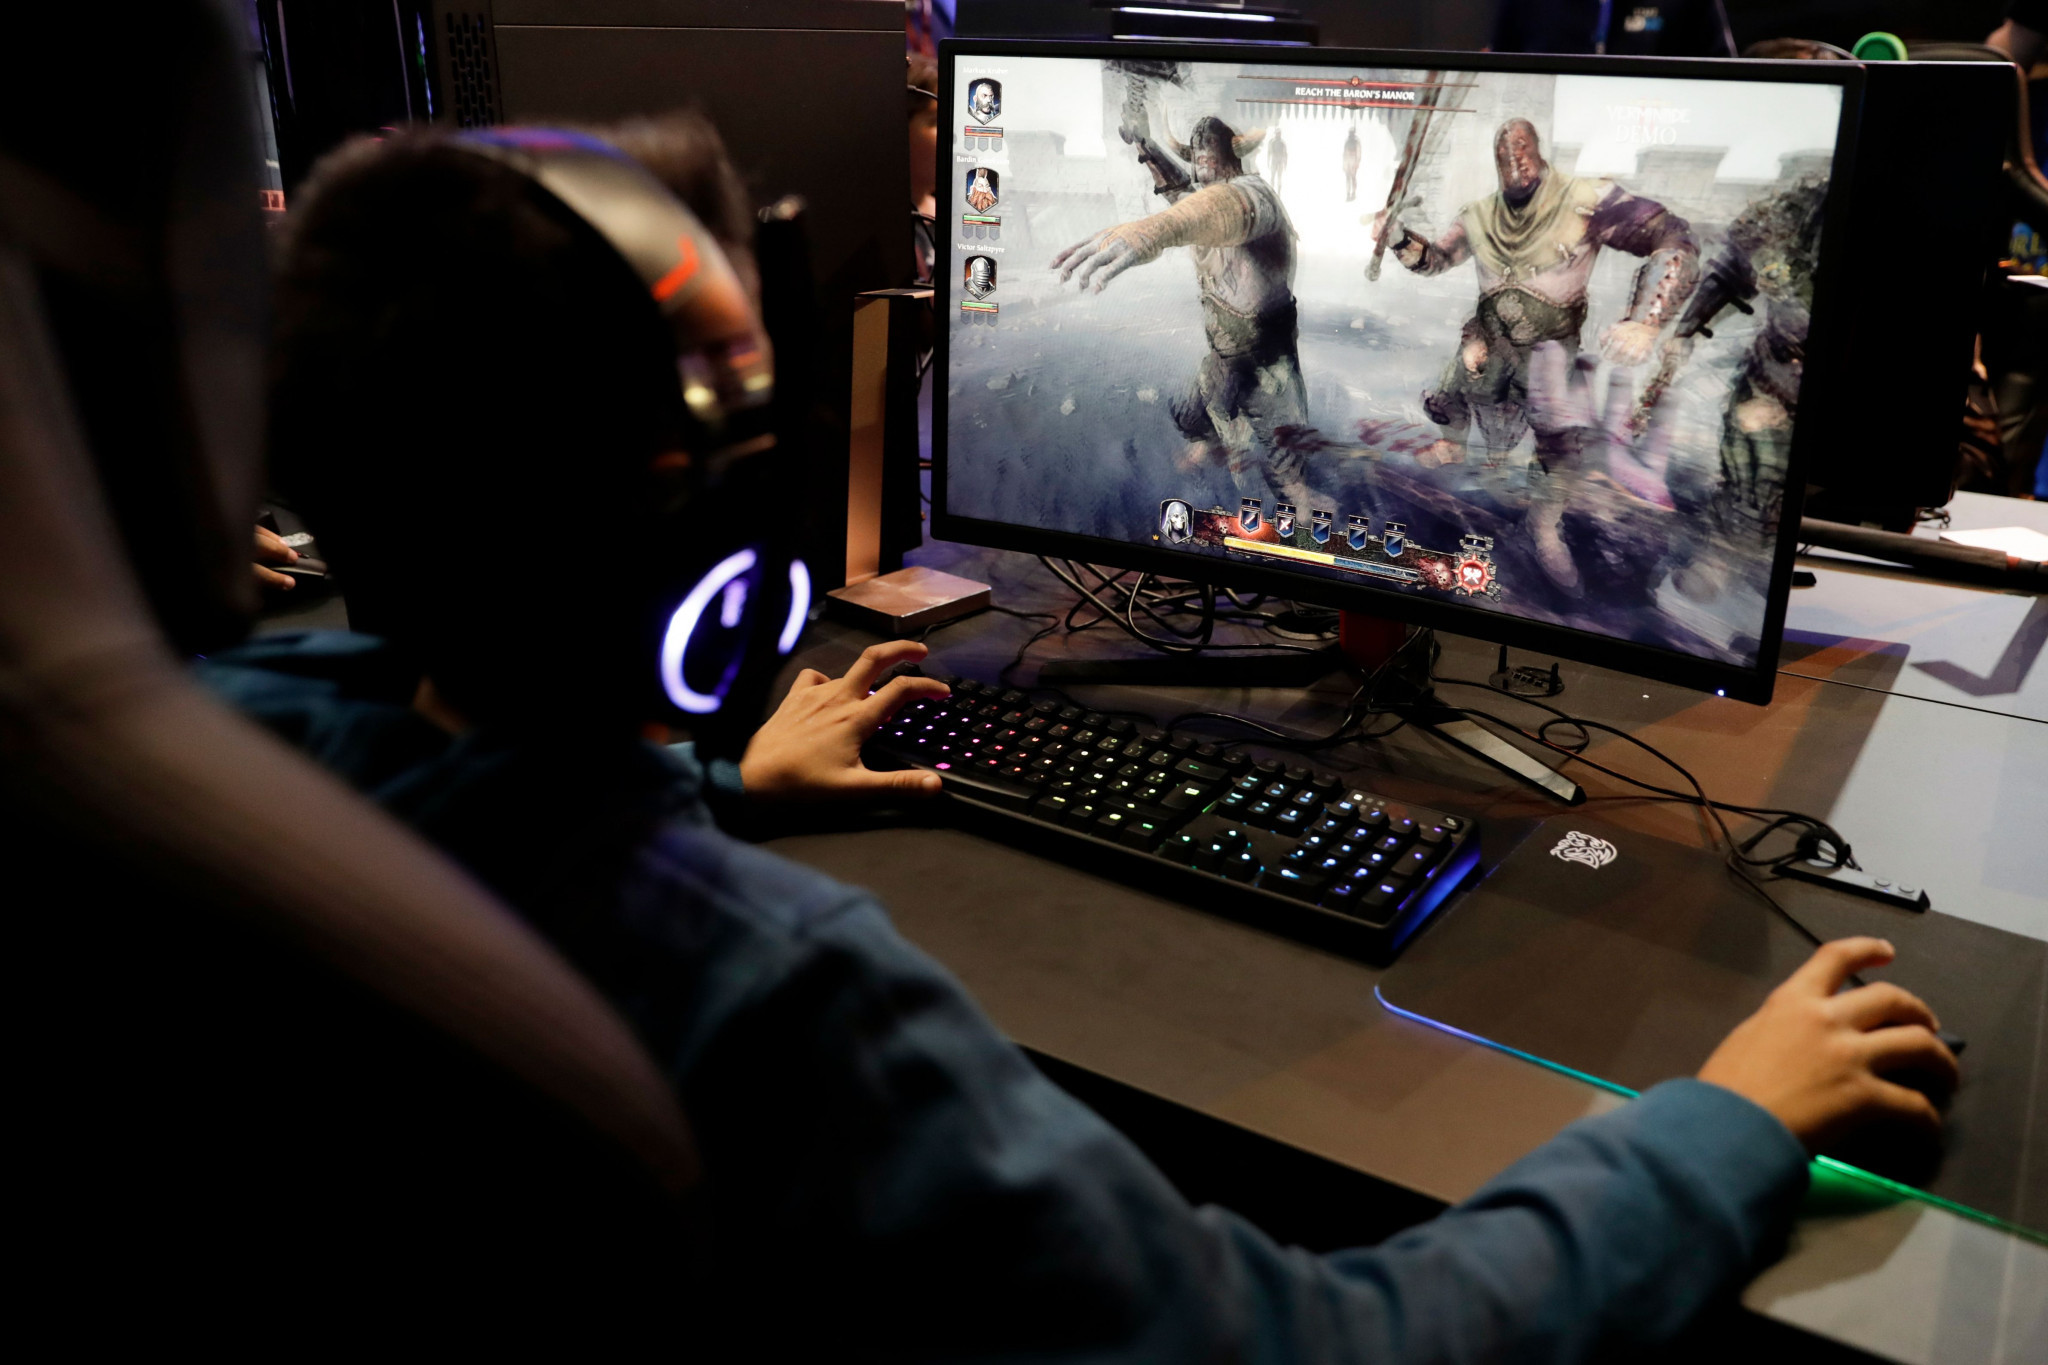 There are concerns that esports can cause long-term health issues ©Getty Images